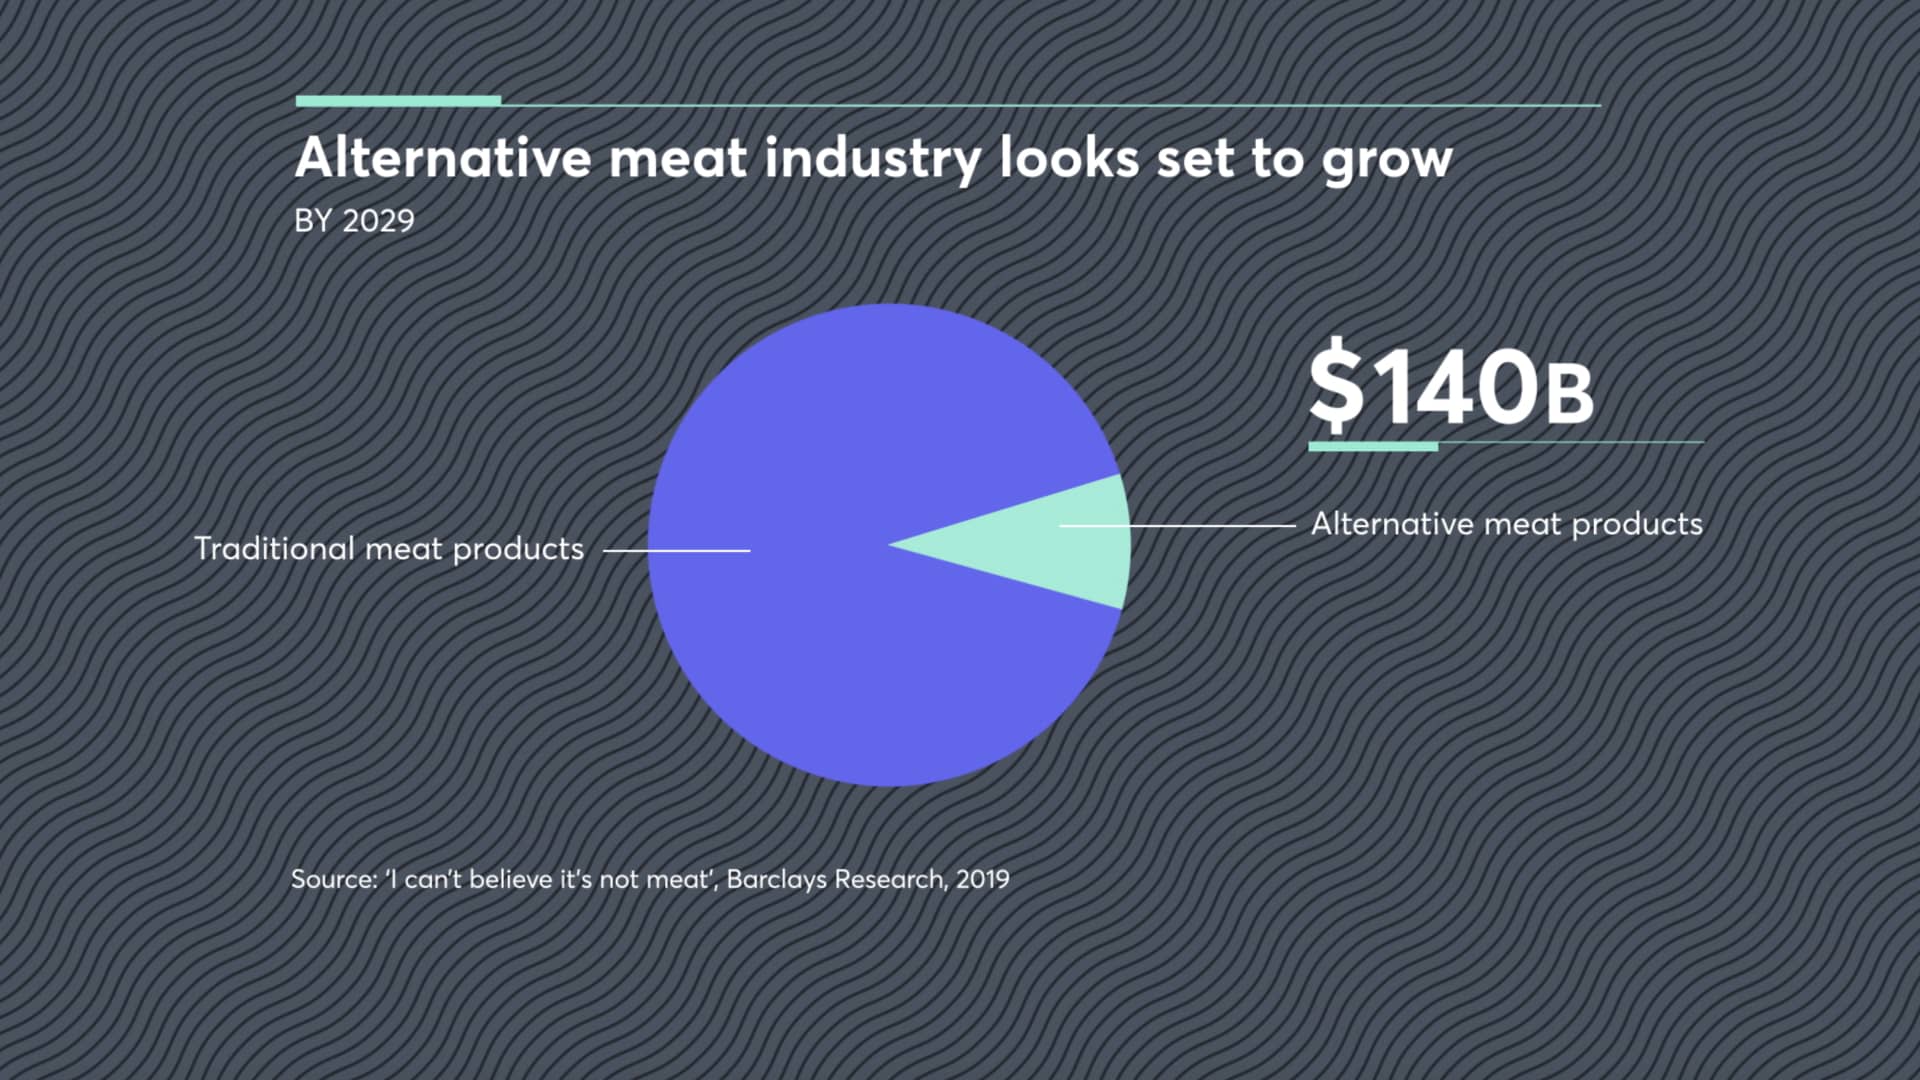 The alternative meat industry is forecast to be worth $140 billion by 2029.